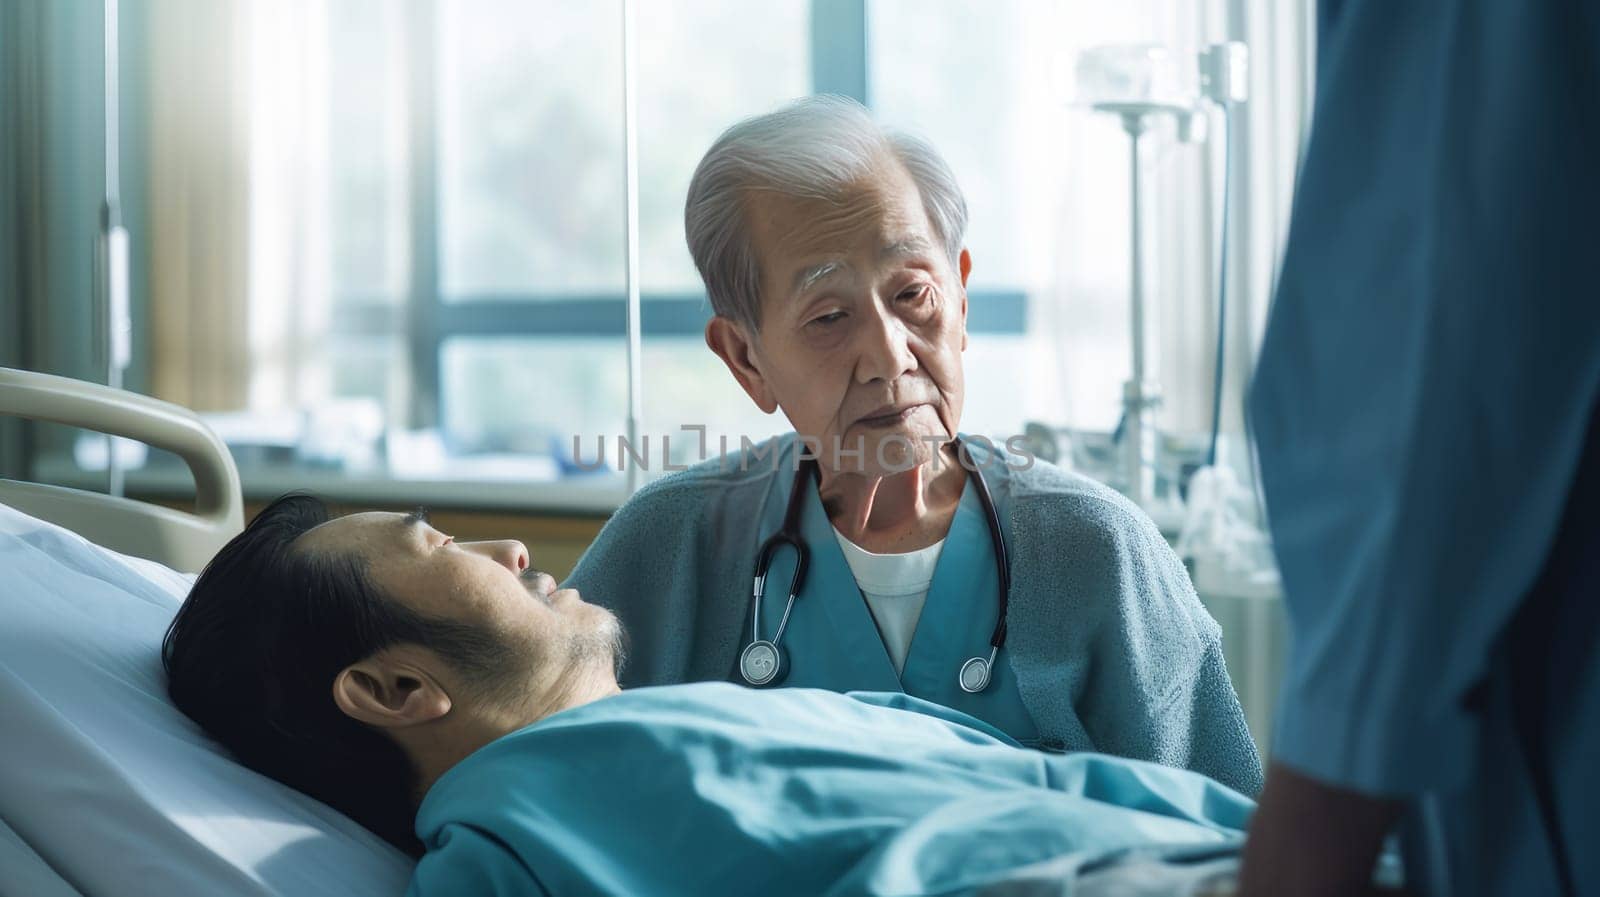 An old elderly patient in poor condition is a patient who needs help from a doctor in a medical hospital with modern equipment. by Alla_Yurtayeva